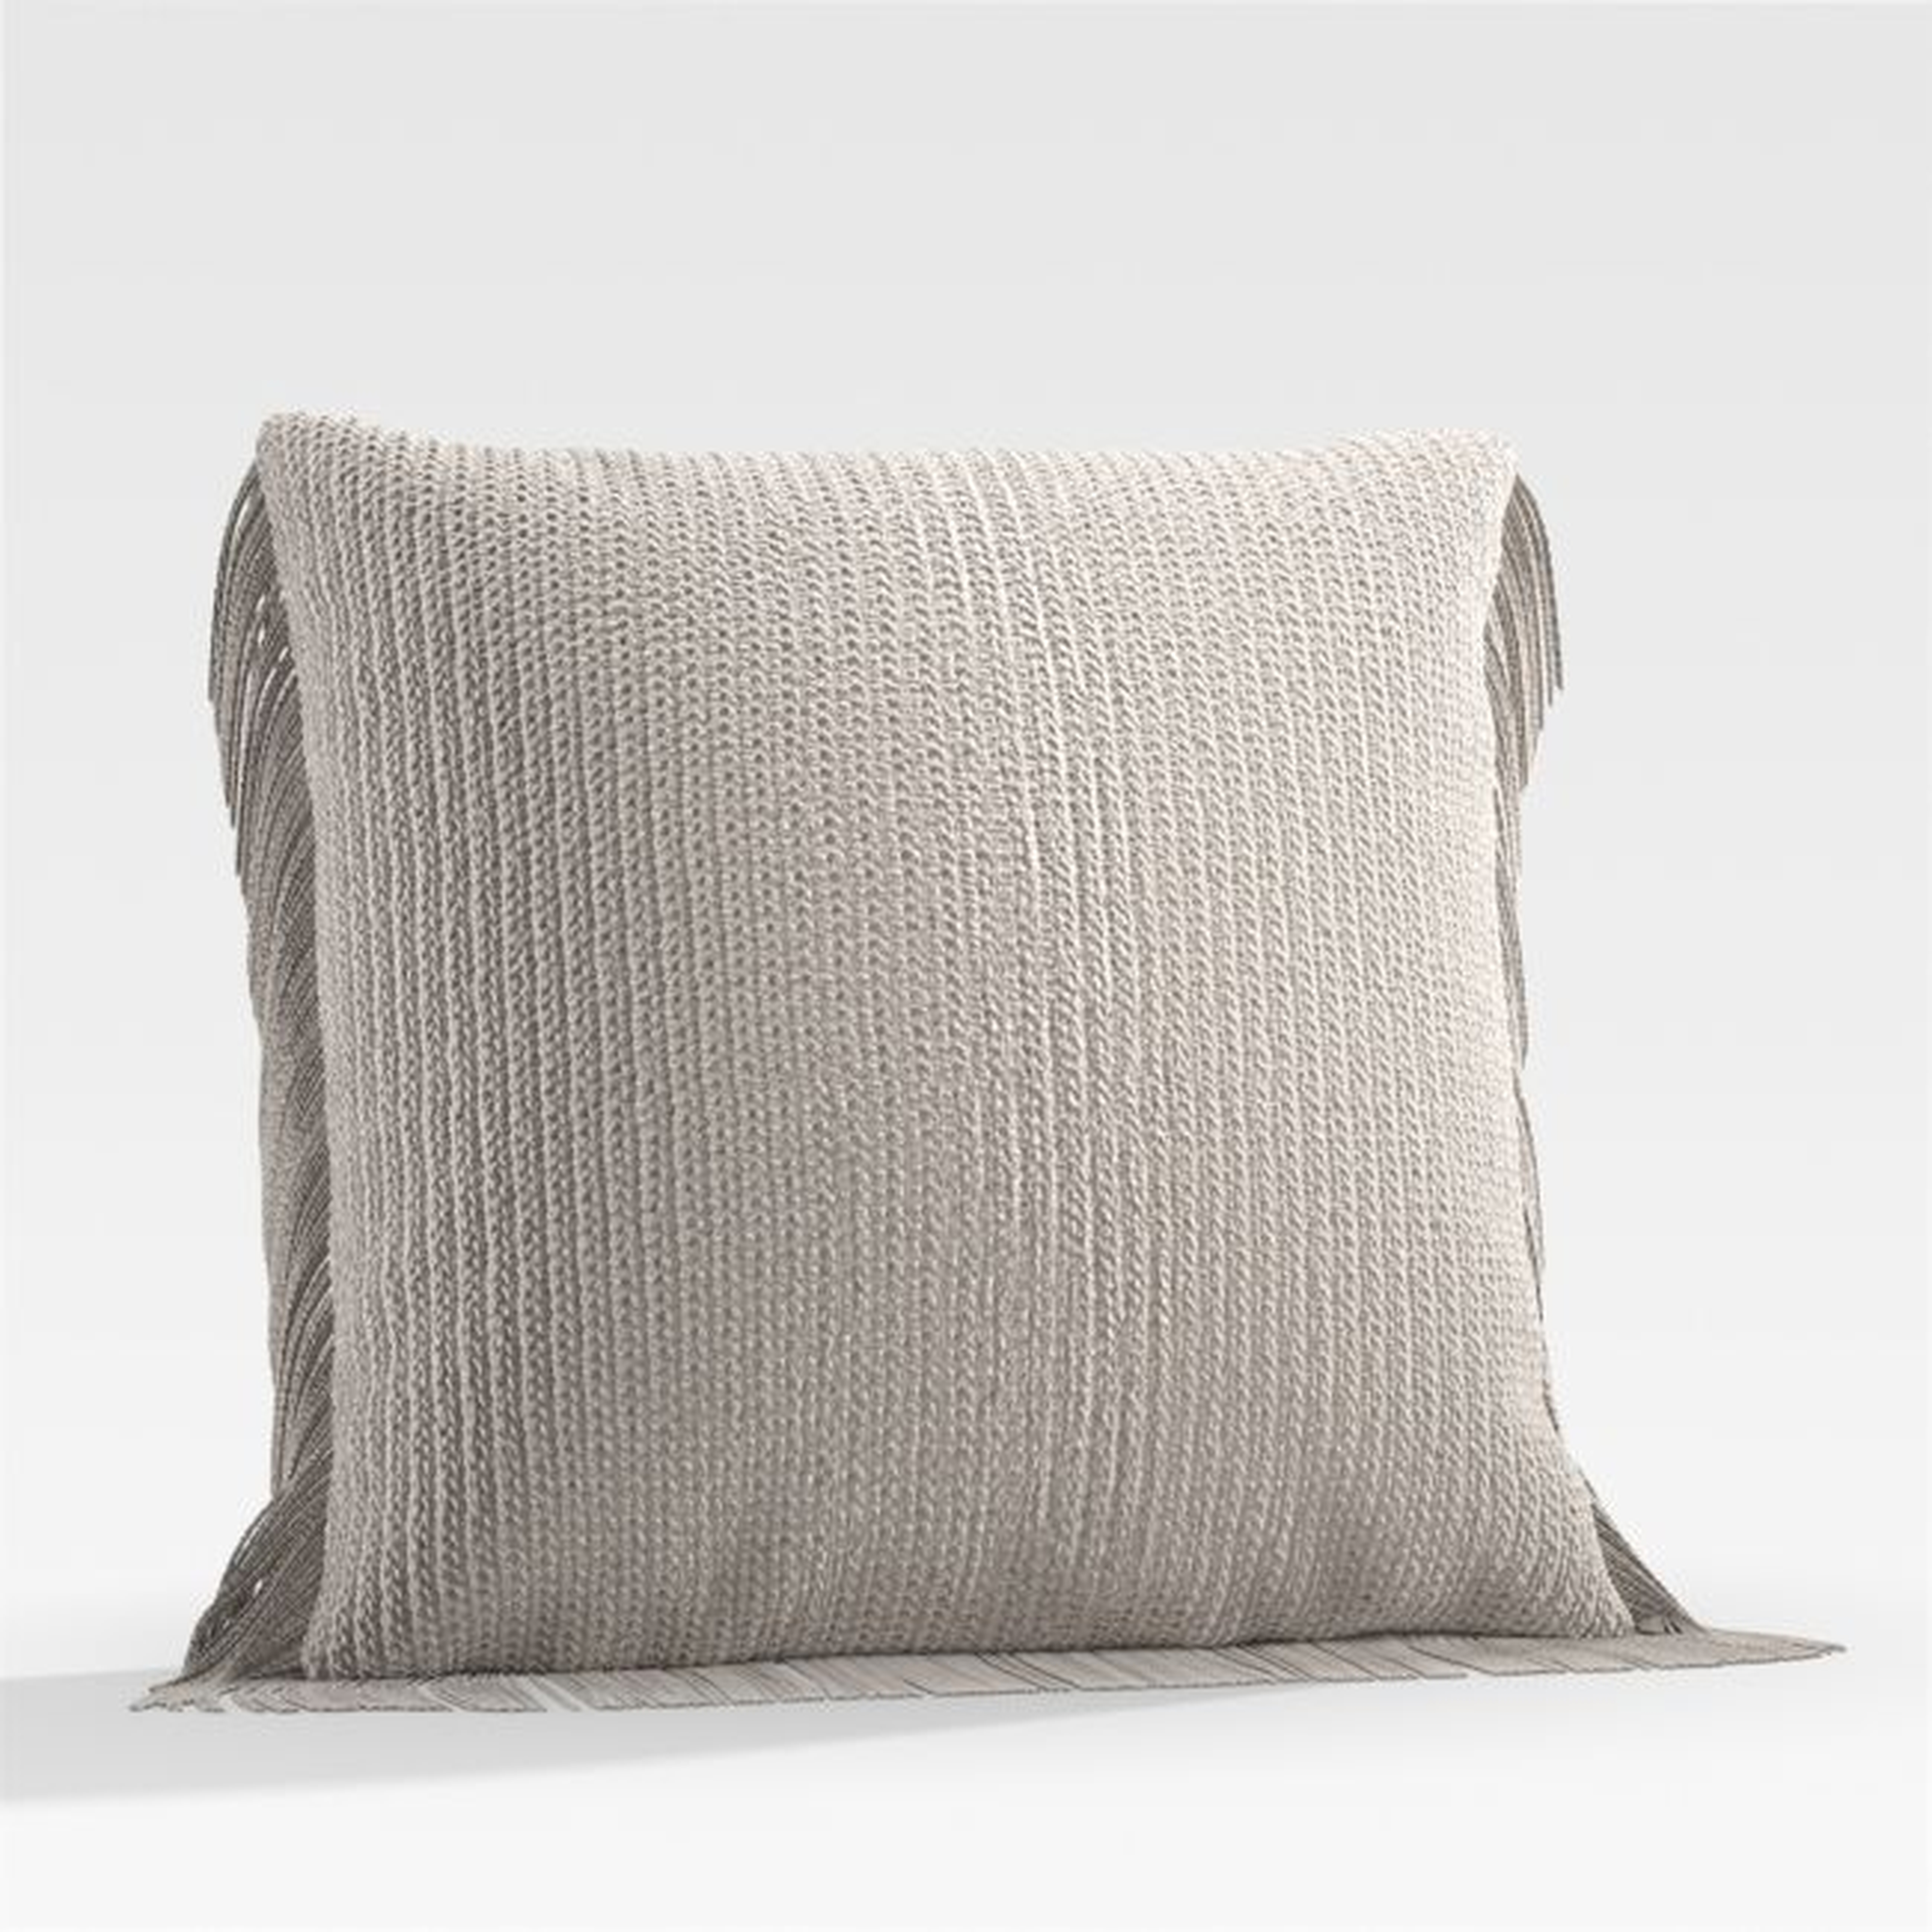 Bergess 20" Ivory Pillow - Crate and Barrel